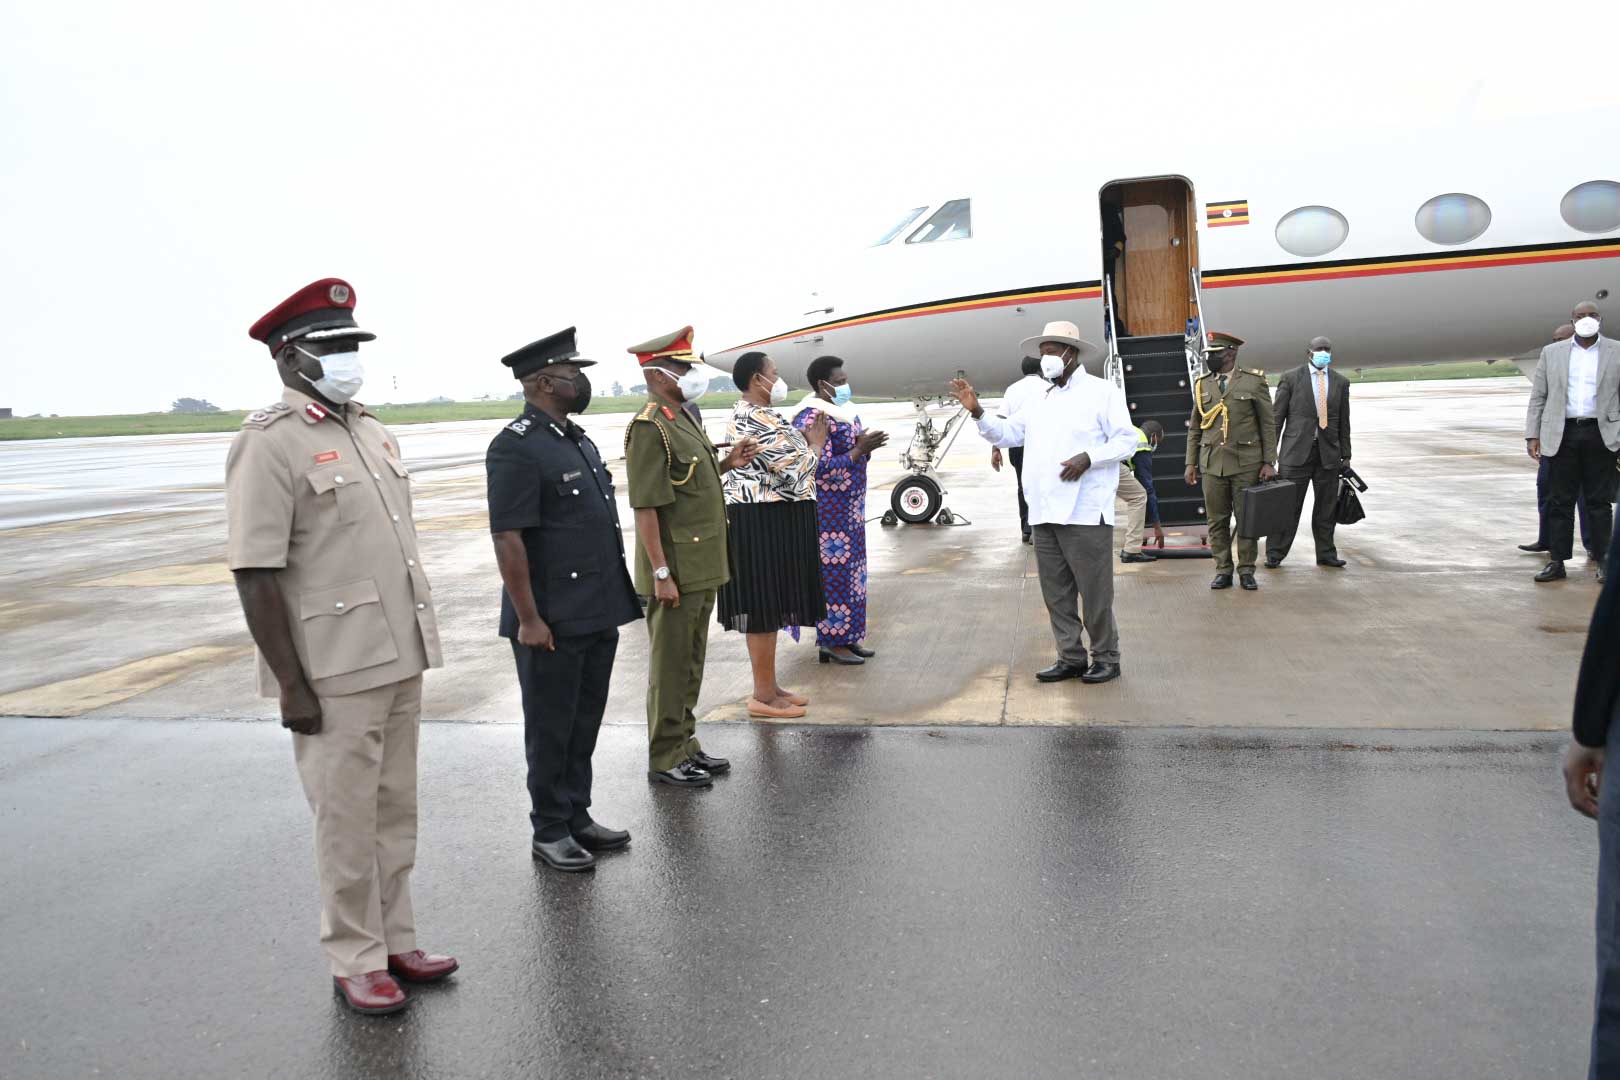 PRESIDENT MUSEVENI RETURNS TO UGANDA AFTER WORKING TRIP TO RUSSIA & SERBIA